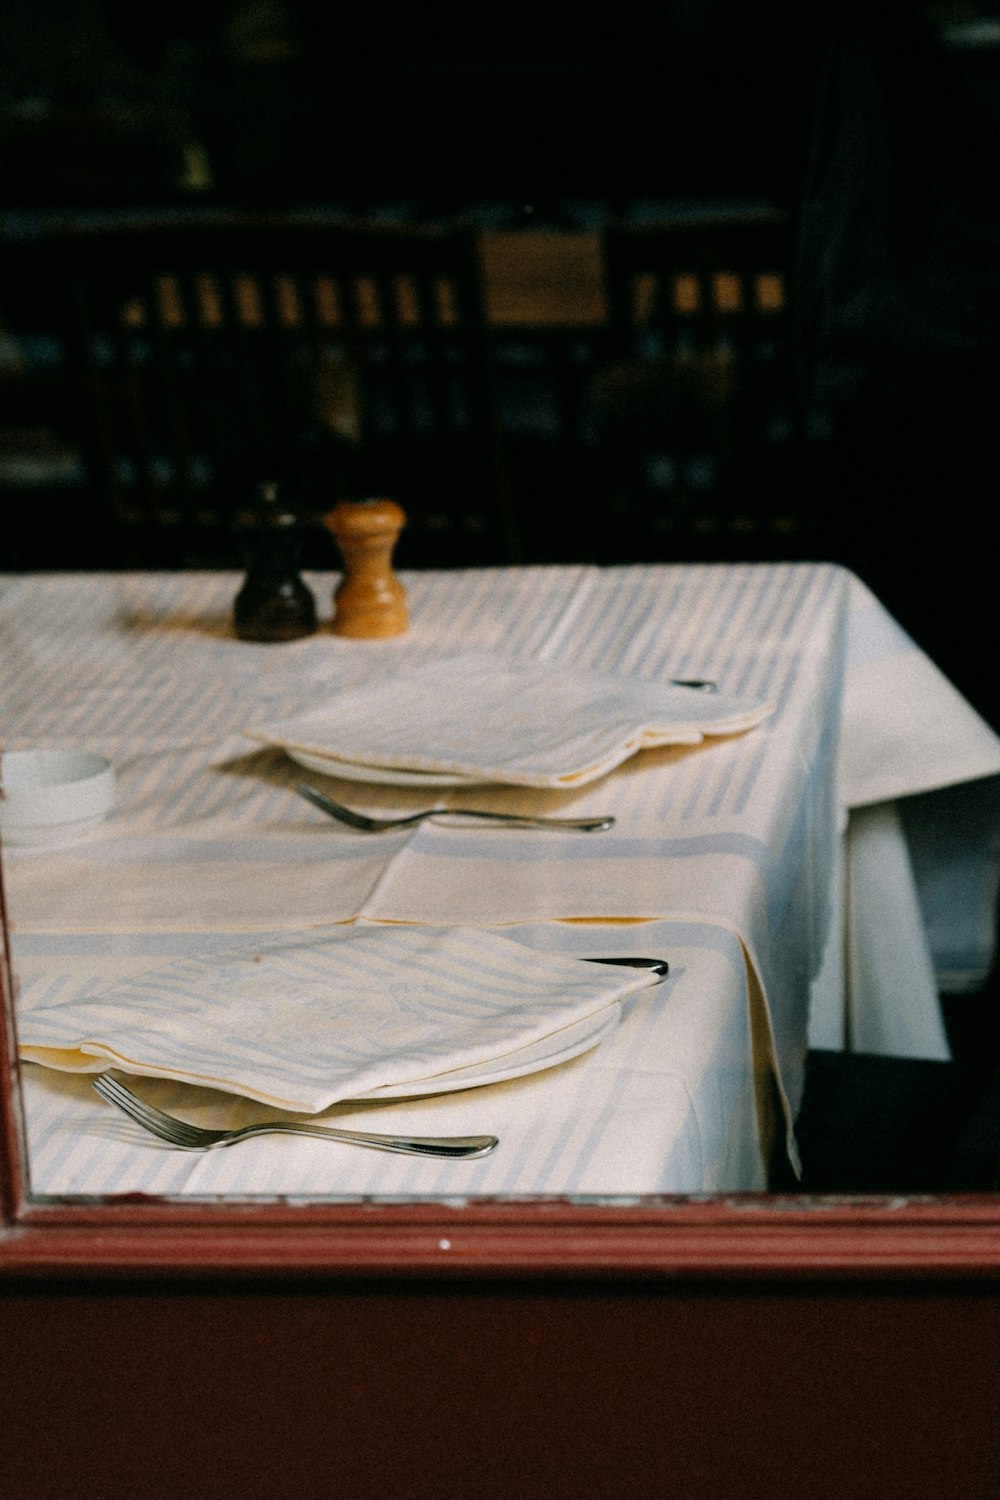 a close up of a table with papers on it